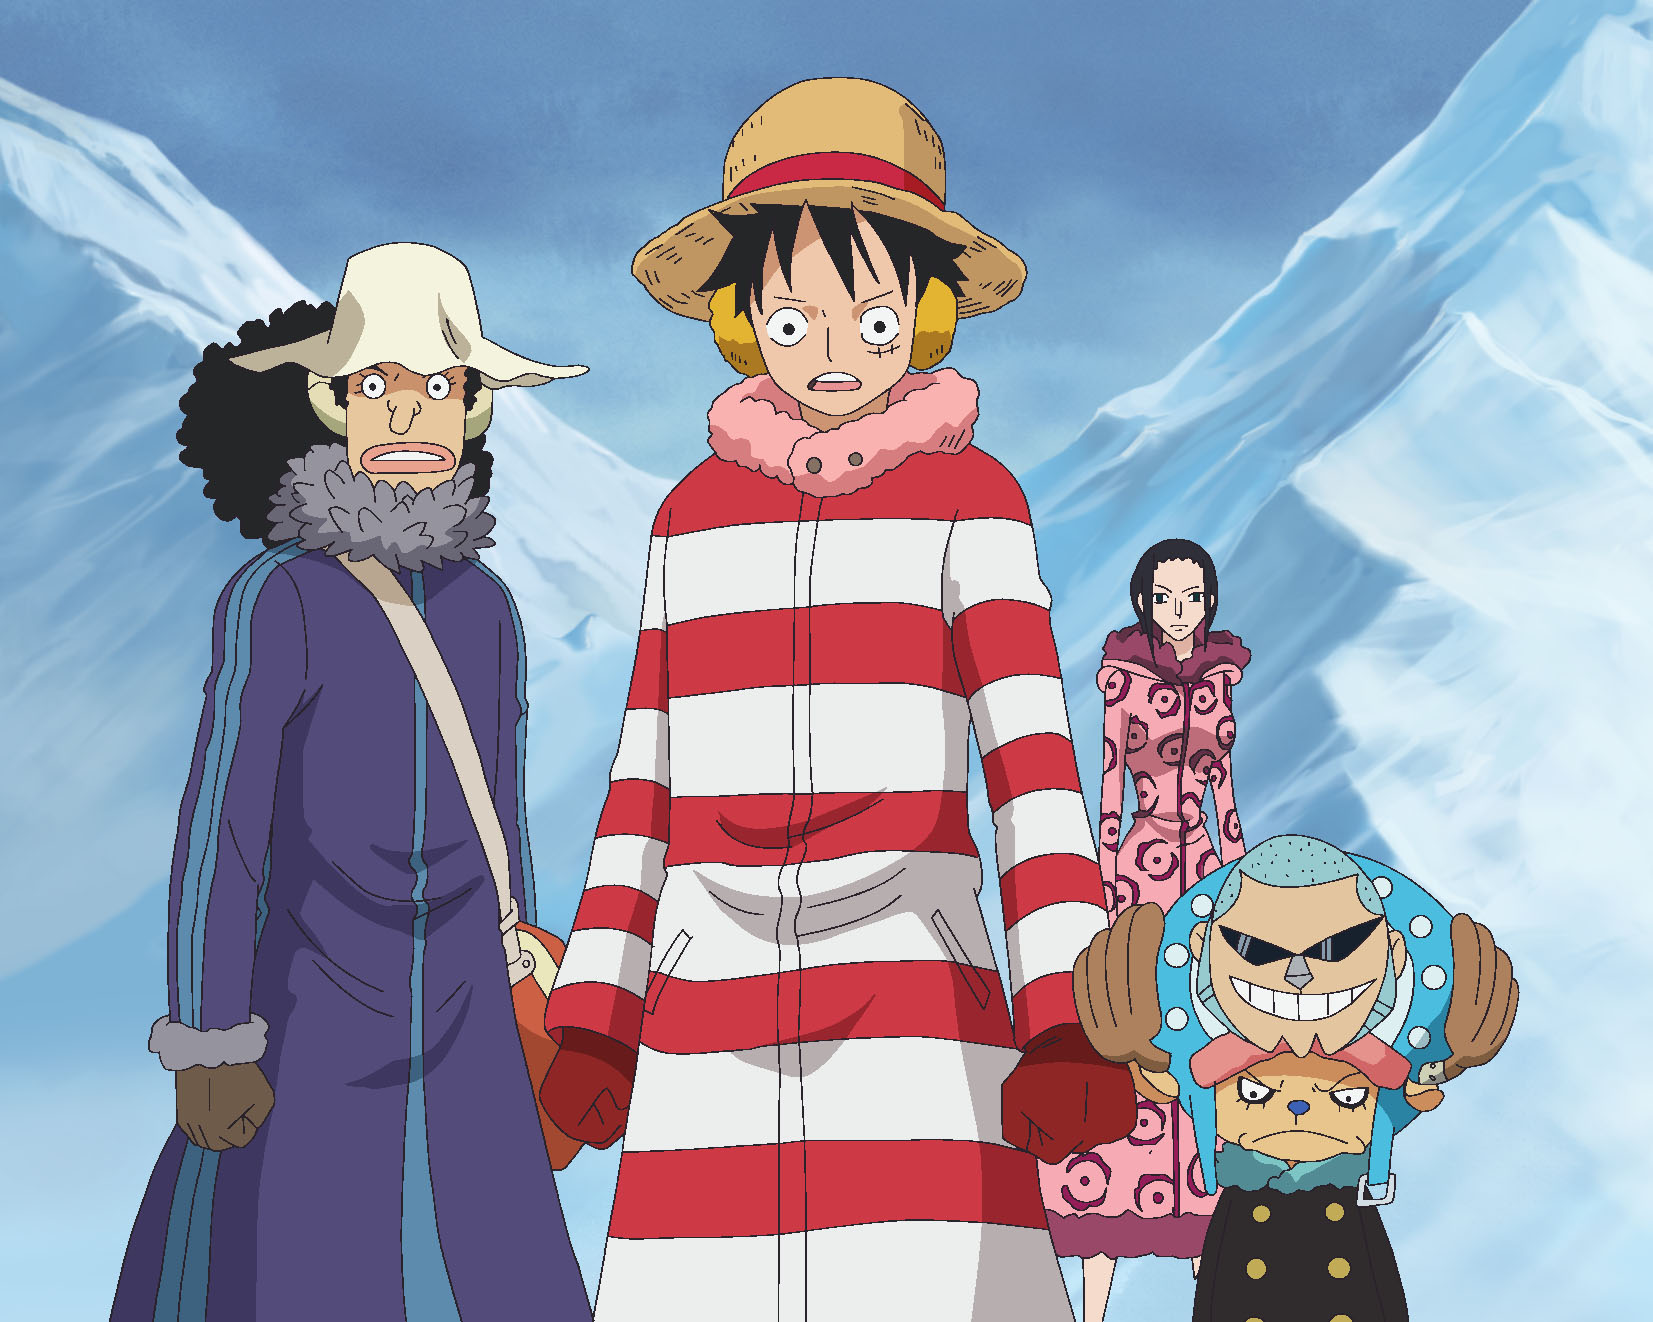 Toei Animation Let S Go The Next Batch Of English Dubbed Episodes Are Coming On Digital This August With One Piece Season 10 Voyage 2 Ep 5 600 Continuing With The Punk